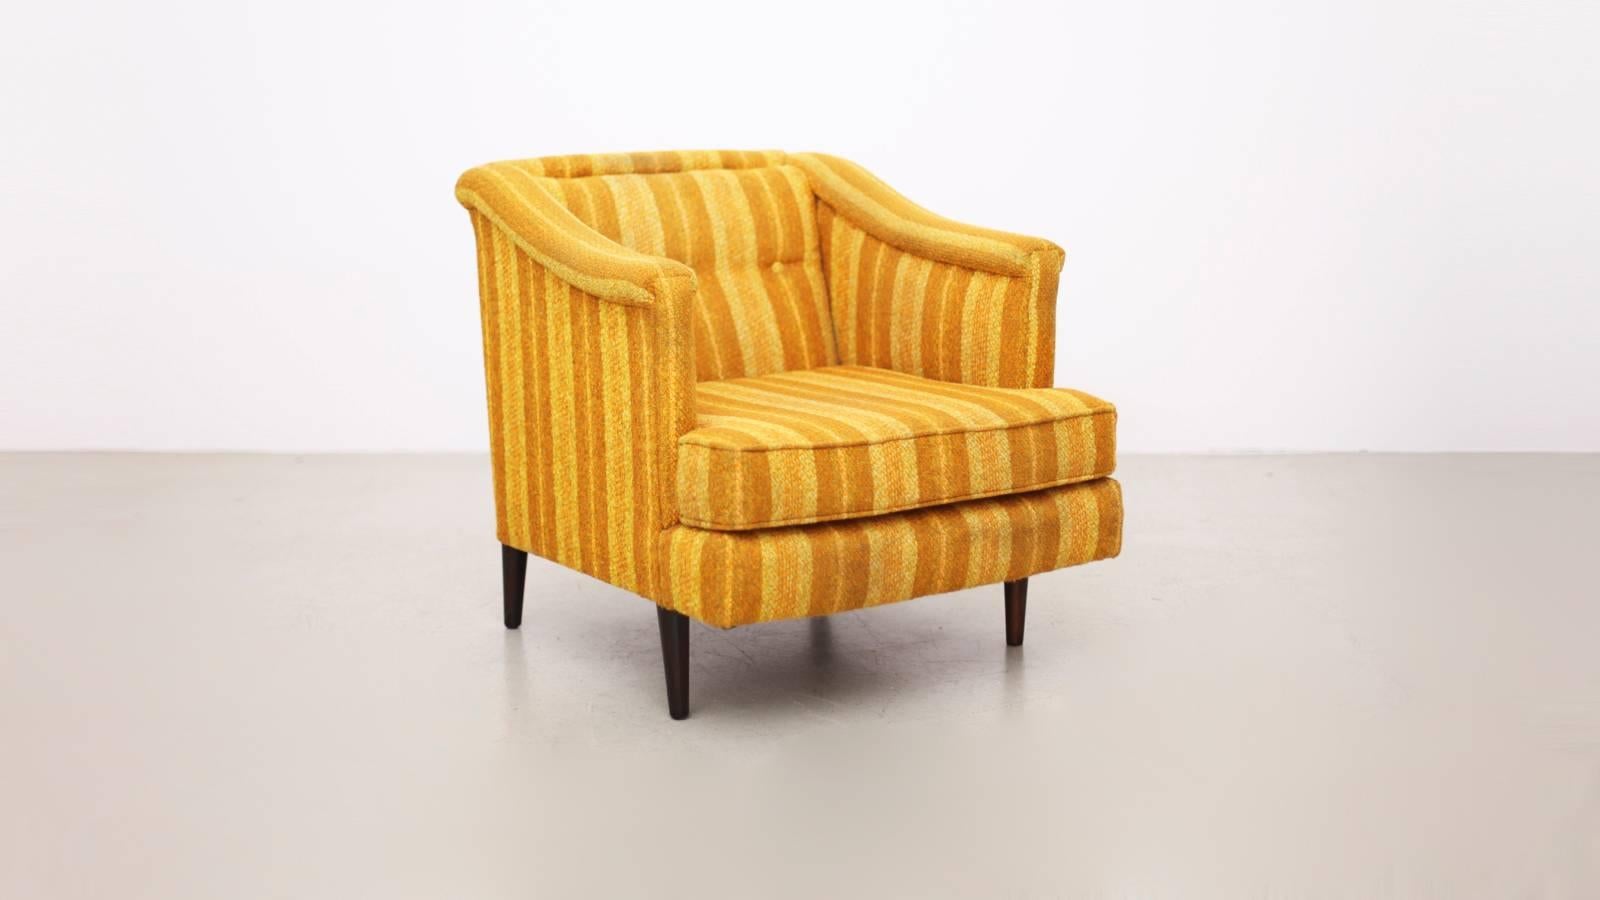 Mid-20th Century Edward Wormley Yellow Lounge Chair for Dunbar, Reupholstery Needed For Sale